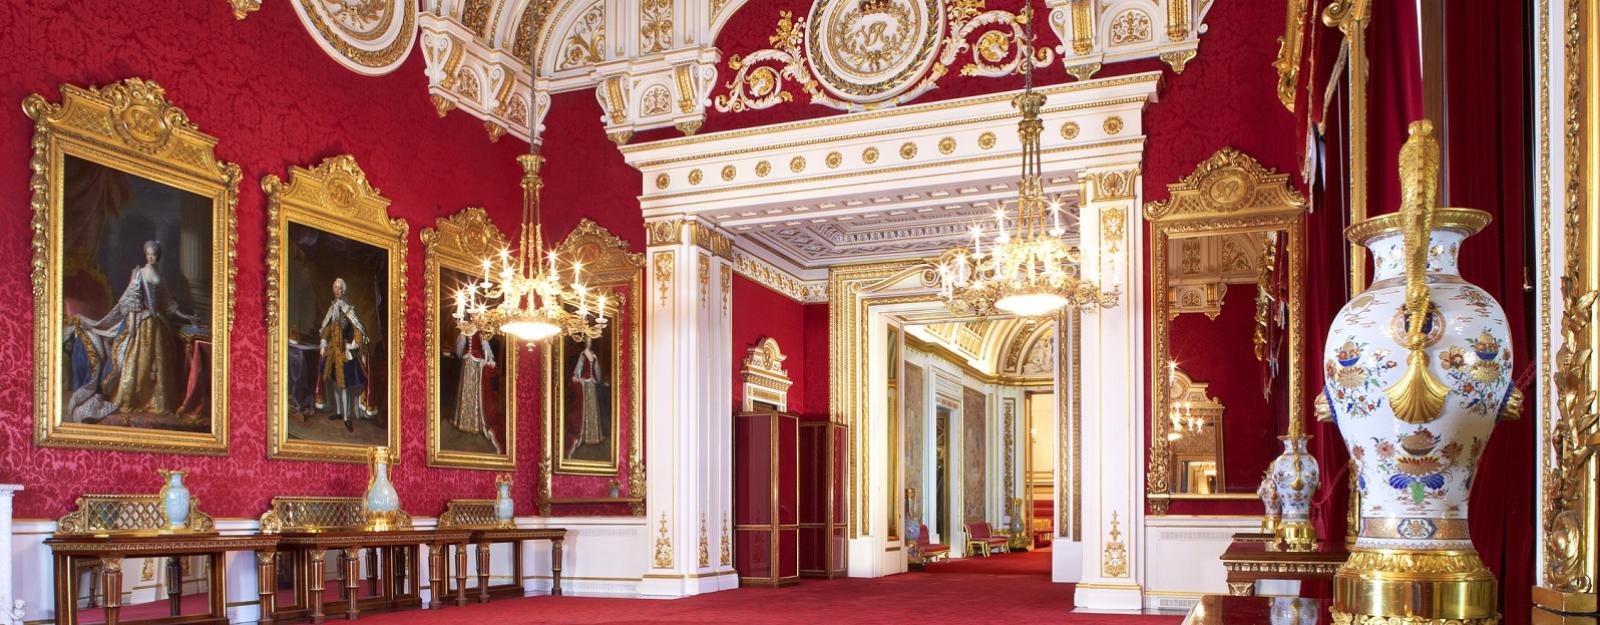 The State Dining Room in Buckingham Palace